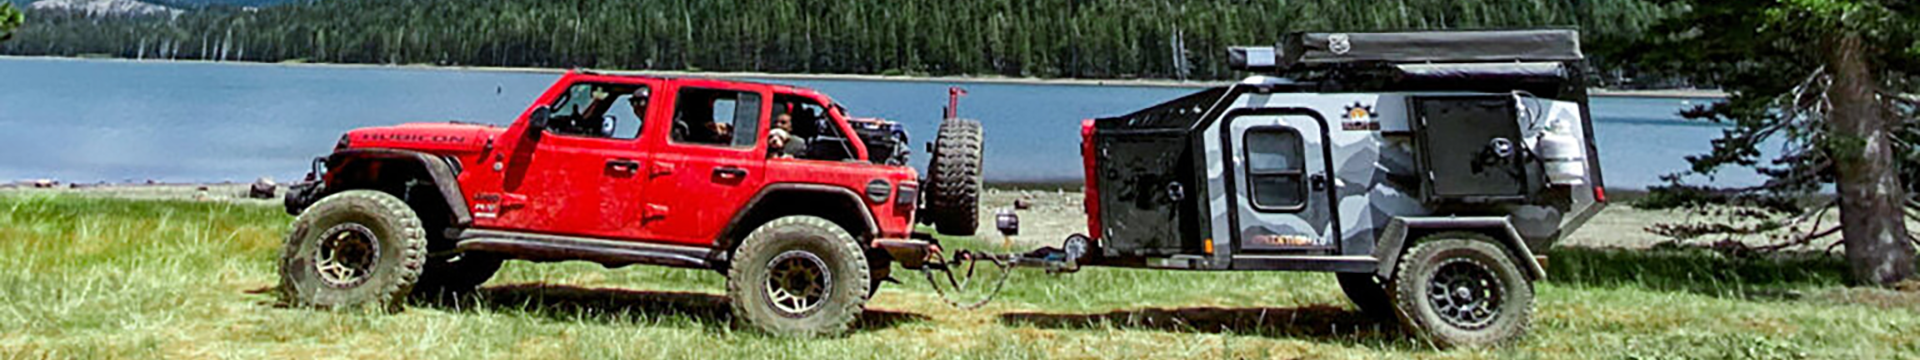 Jeep and overland trailer